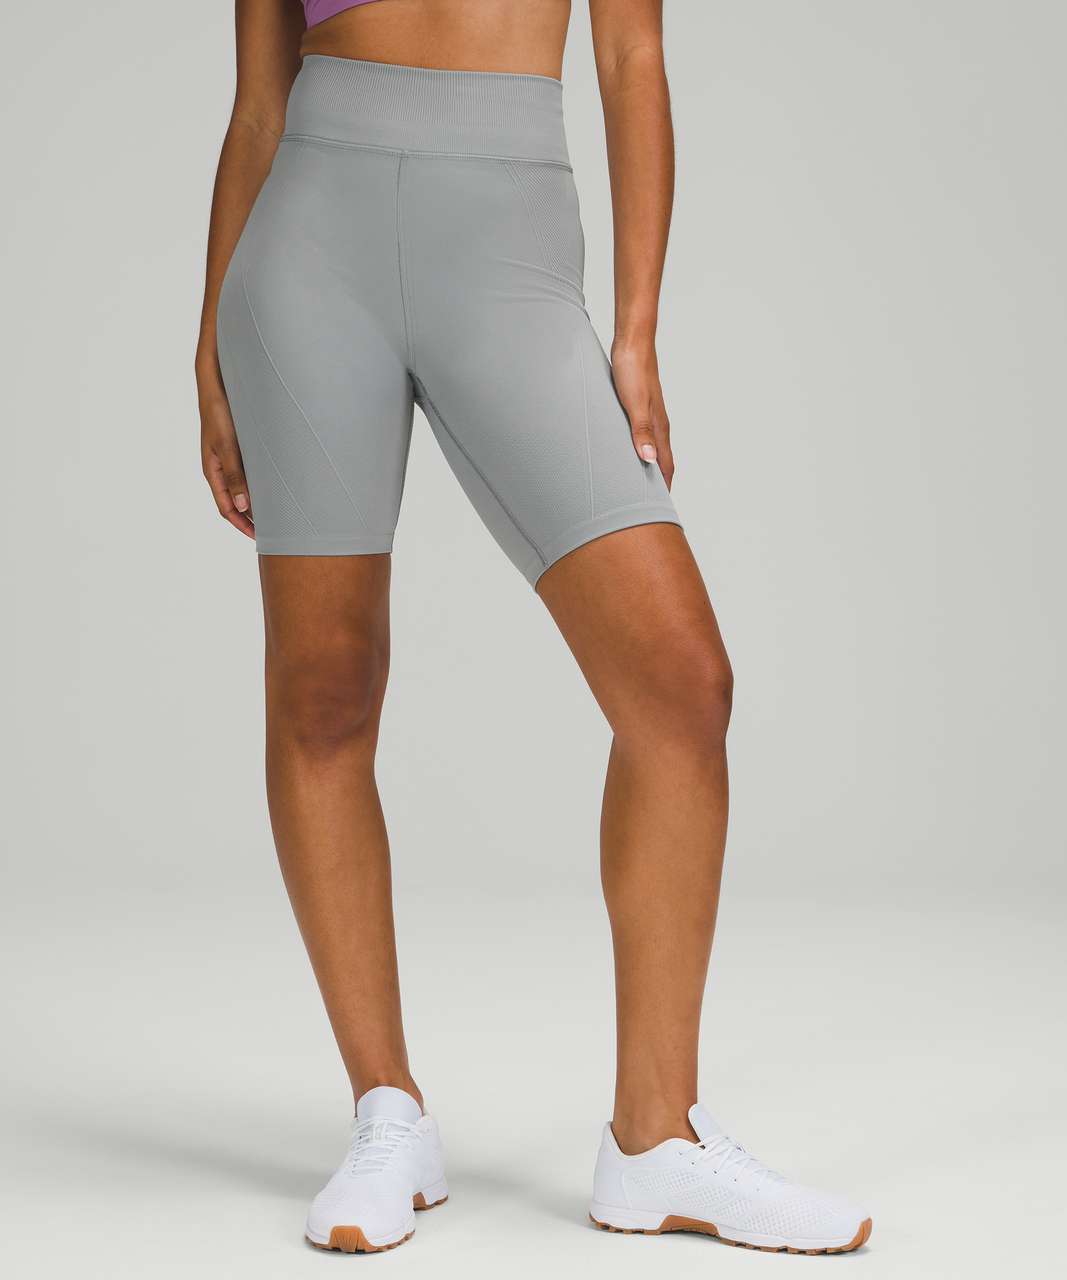 Lululemon For the Chill Of It High Rise Short 8" - Rhino Grey